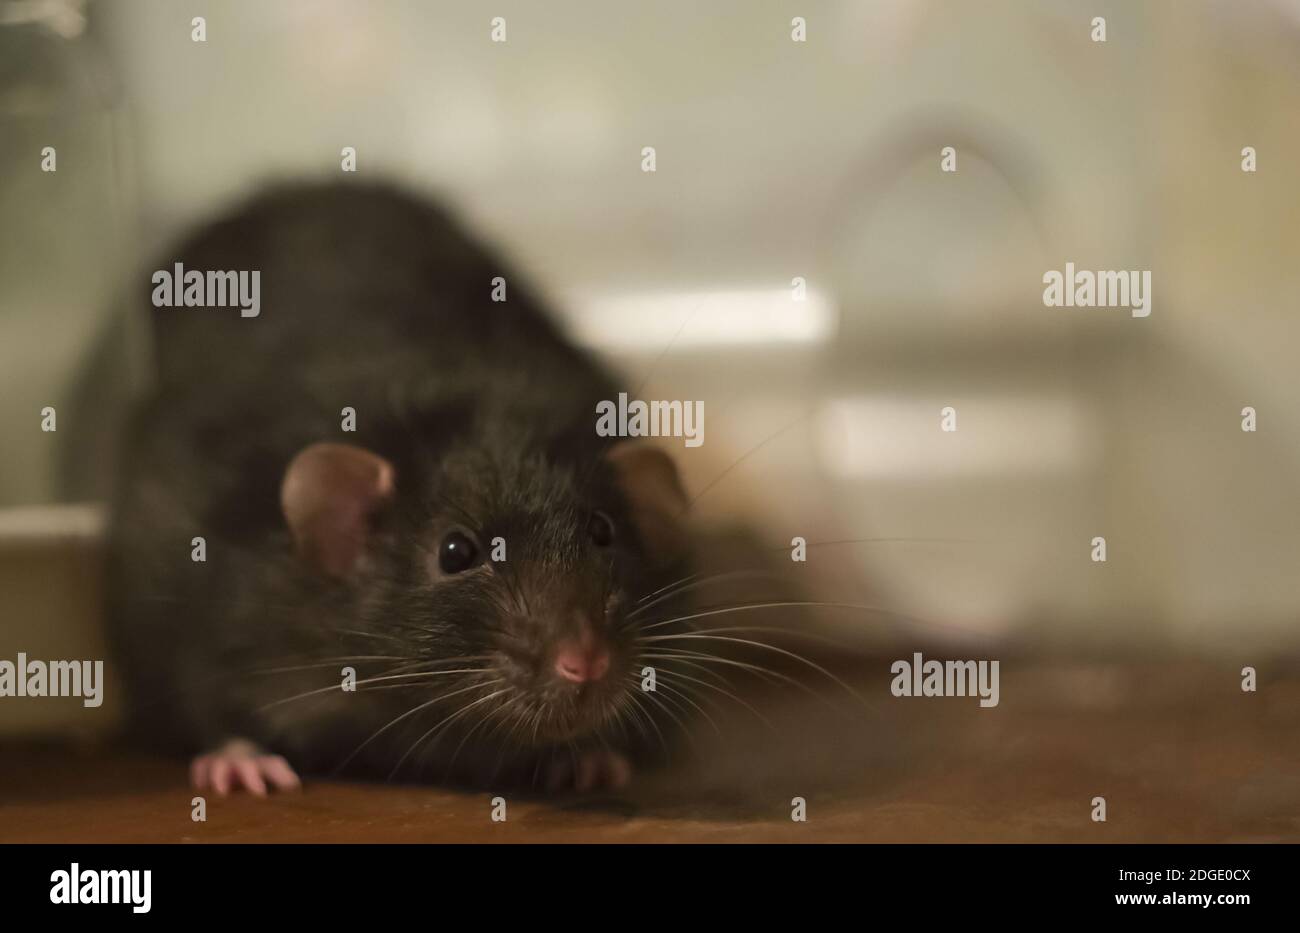 Large rat black mink with dark eyes on a wooden surface, focus on the head on a blurred background Stock Photo